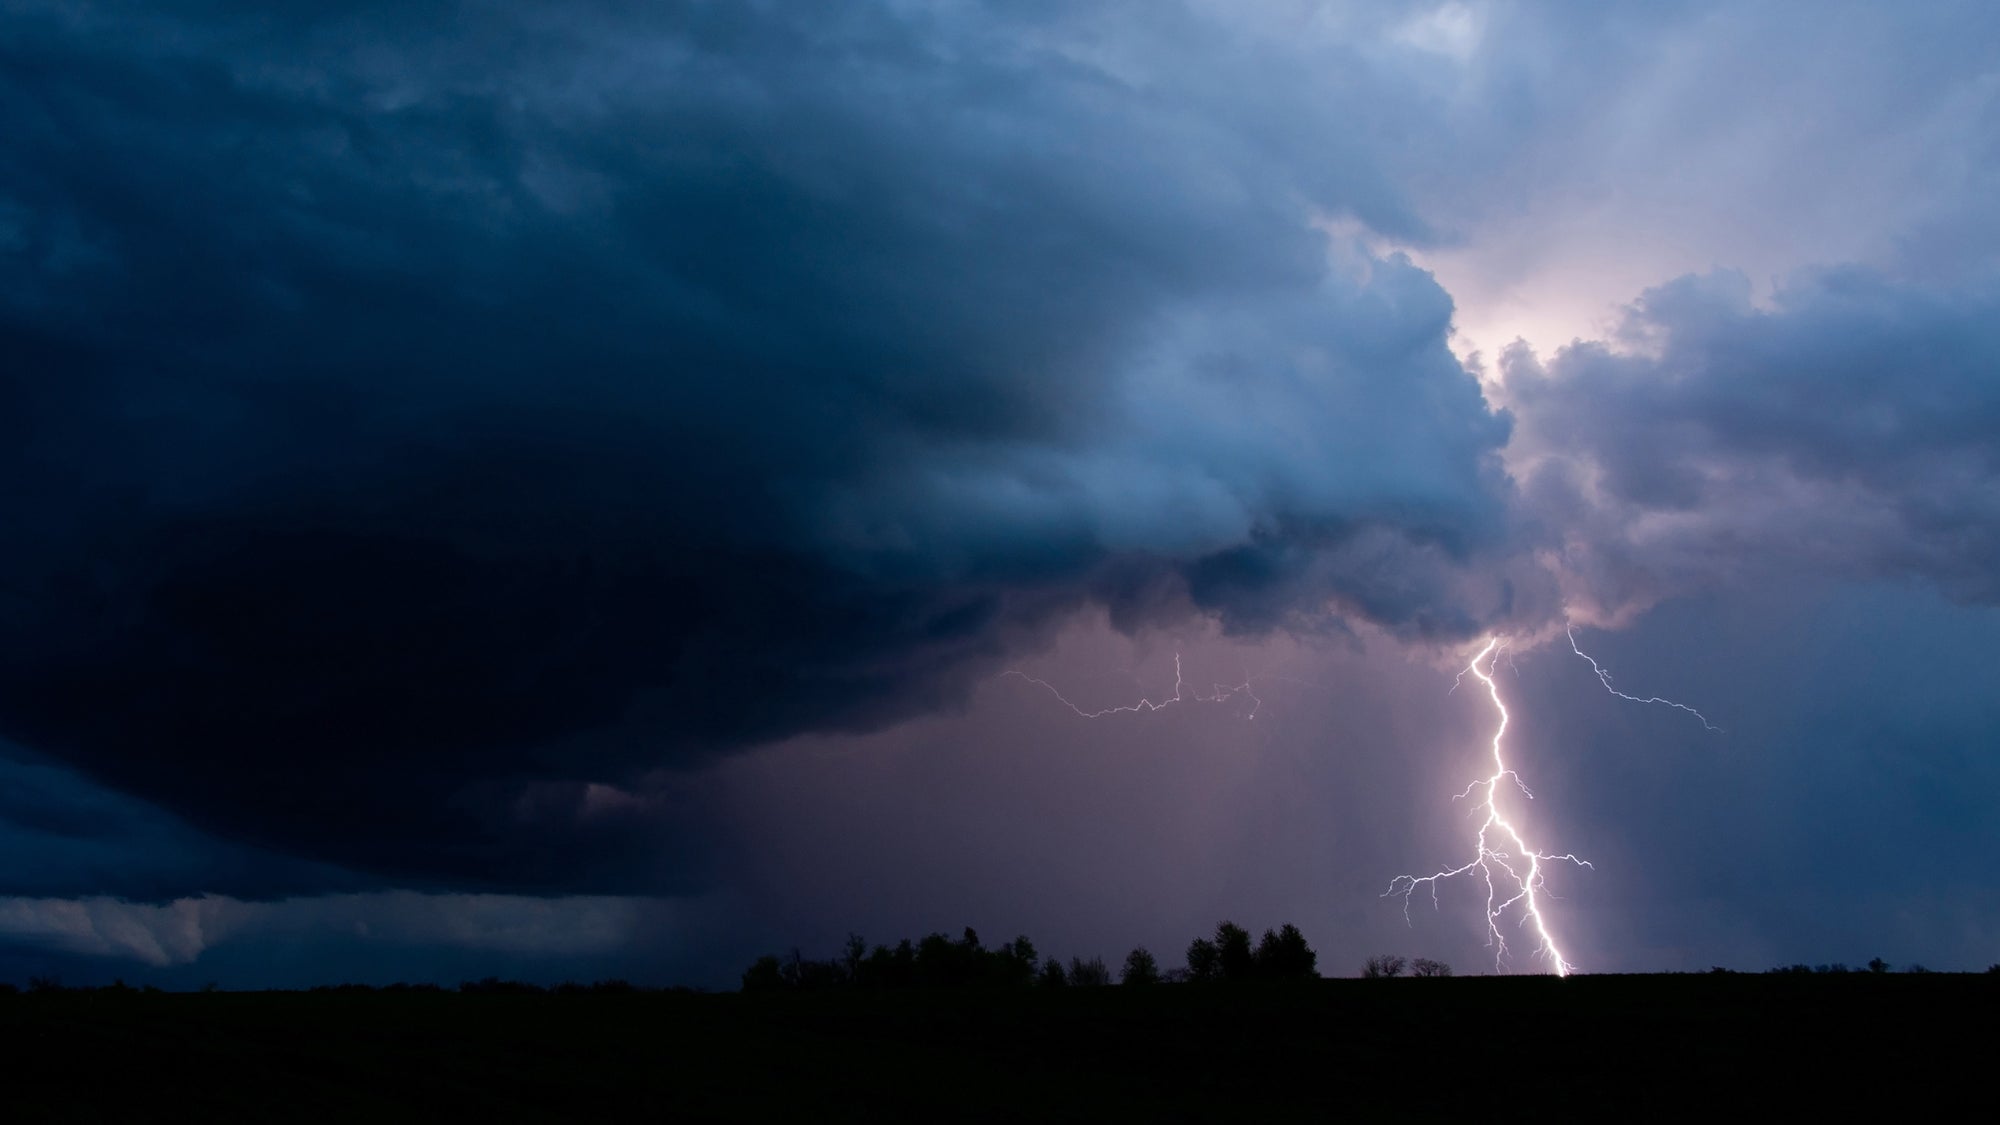 Photographing With Gearing - Capture Lightning